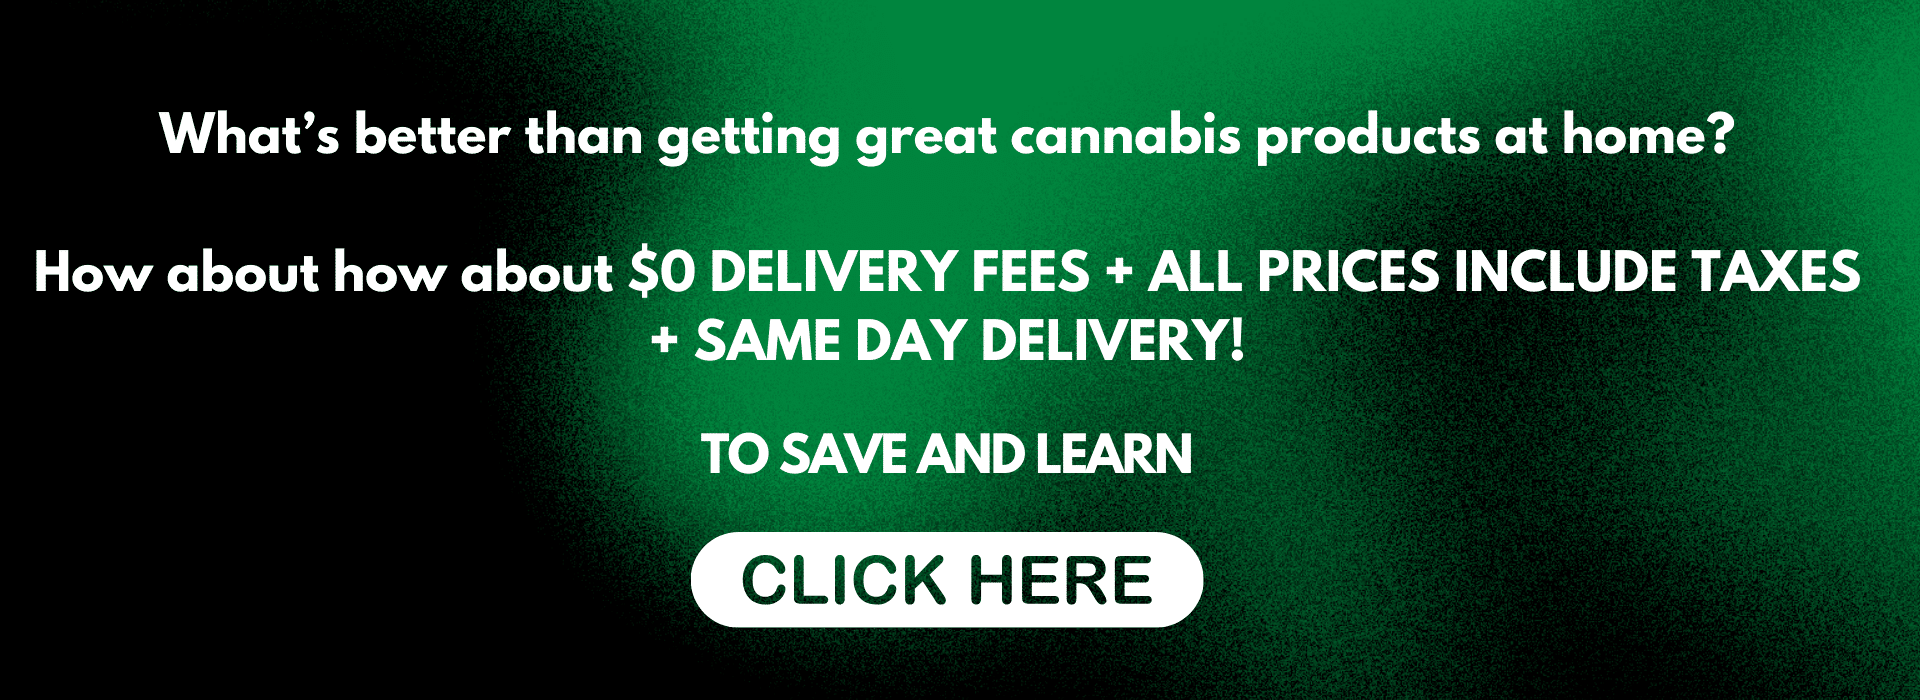 Save big delivery service home delivery cannabis